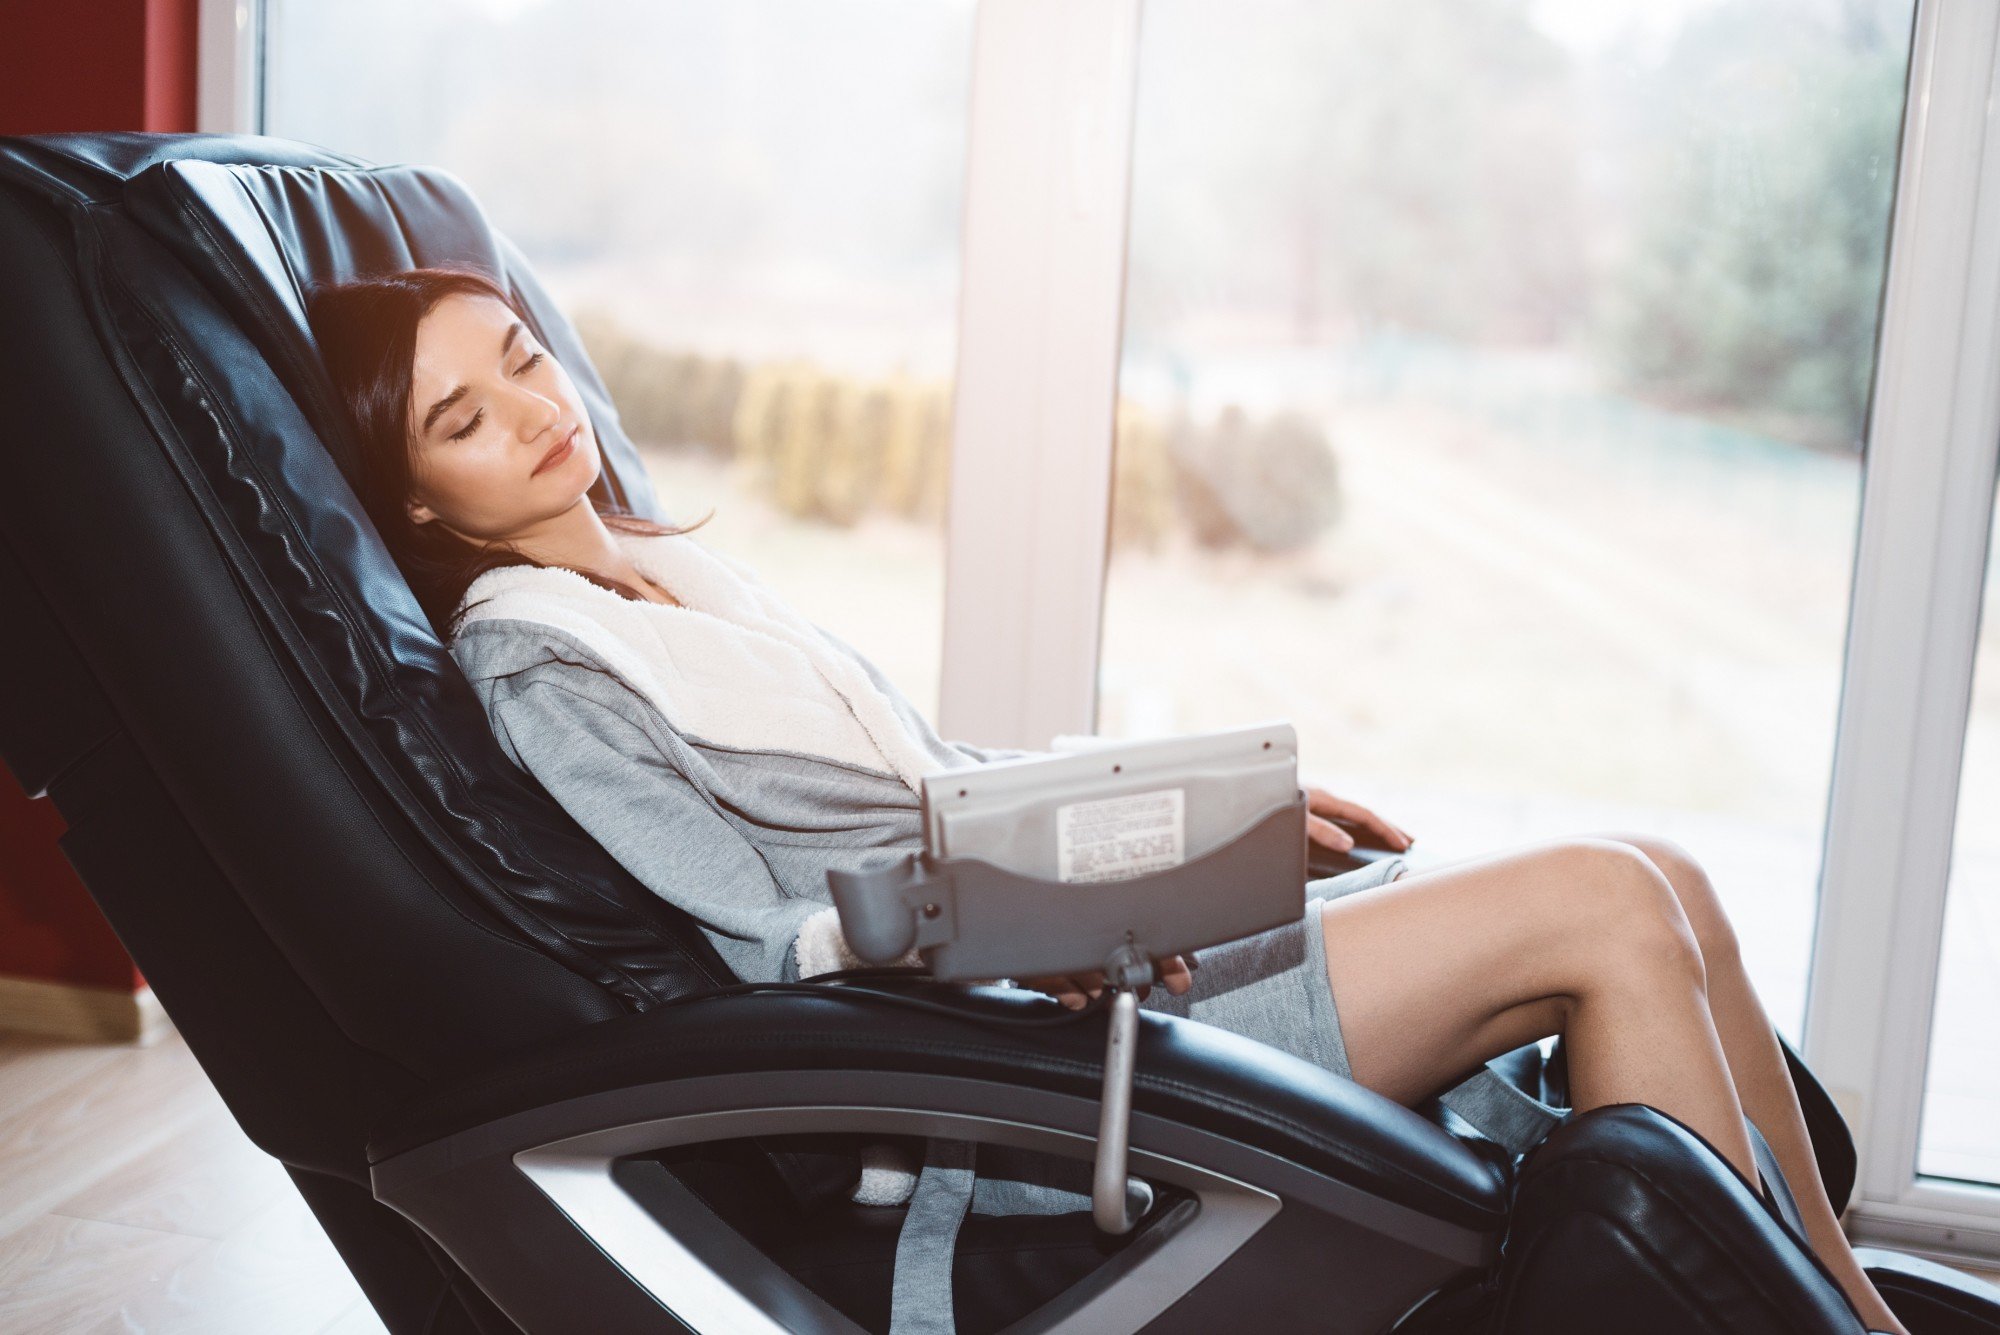 Are you looking for new ways to improve your office? Click here for five great benefits that come with investing in office massage chairs.